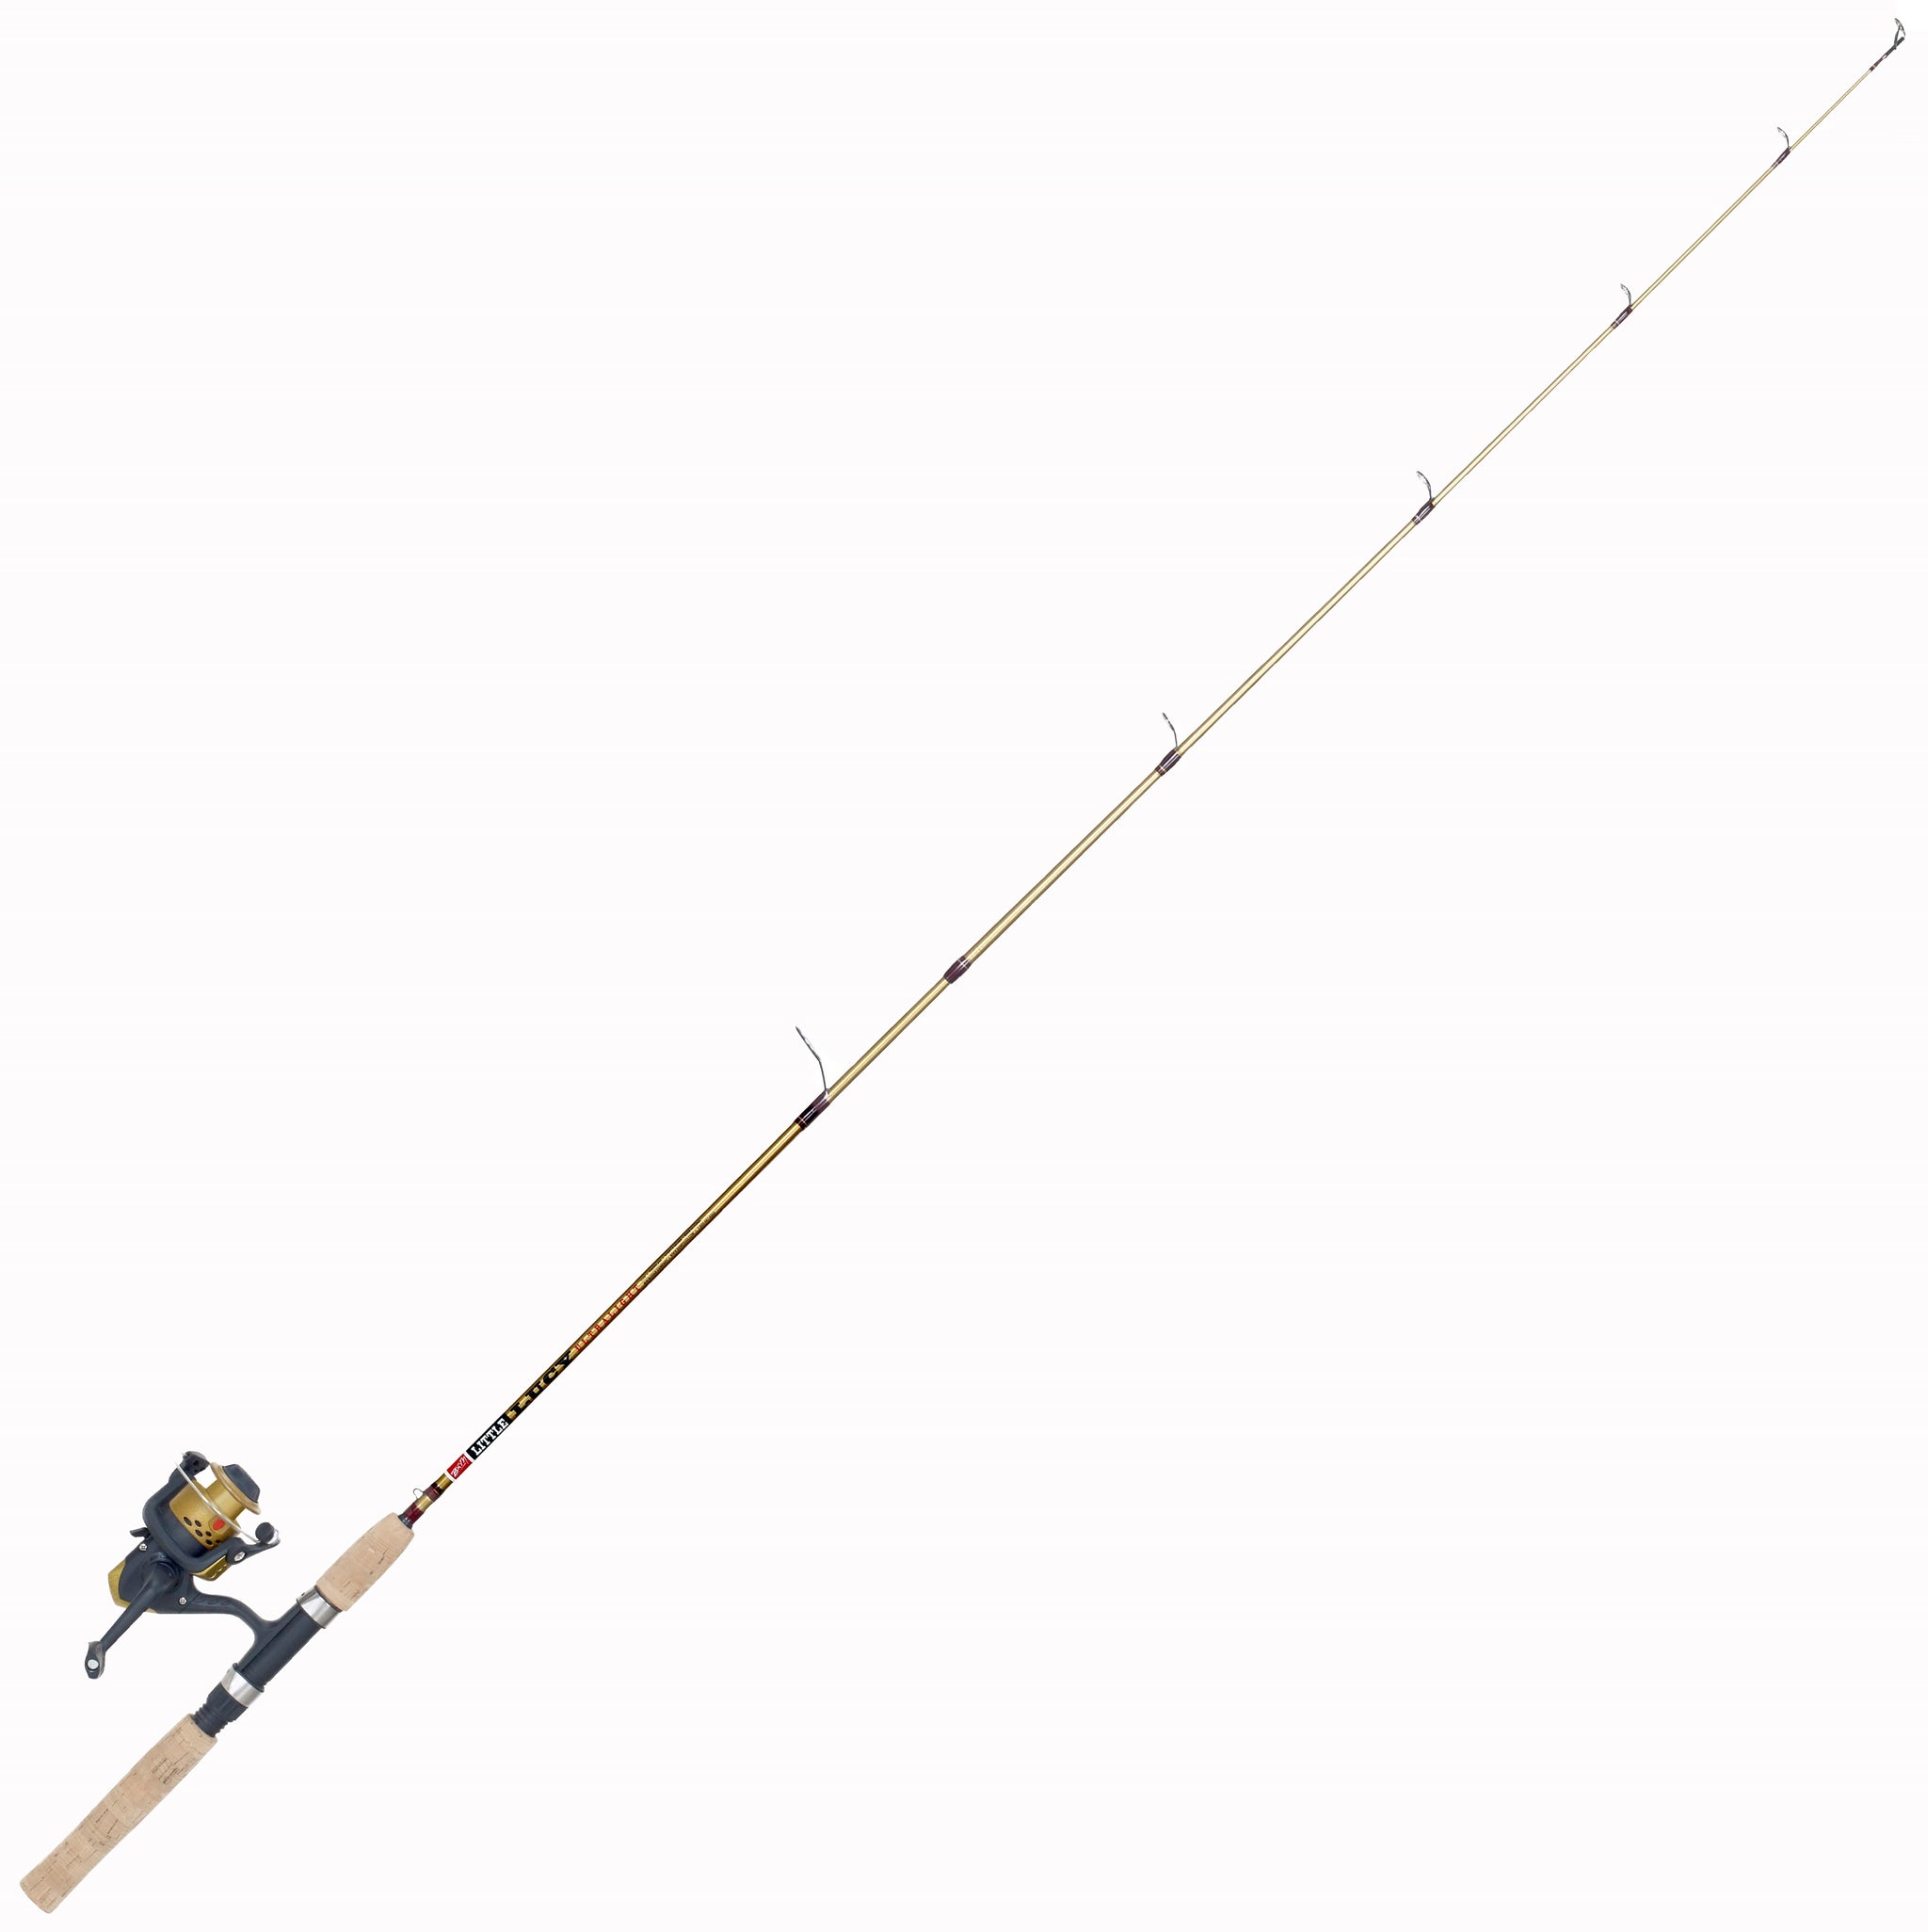 BnM Fishing® SP60Gn-100-2 - Buck's Graphite Crappie 6' Spinning Rod & Reel  Combo 